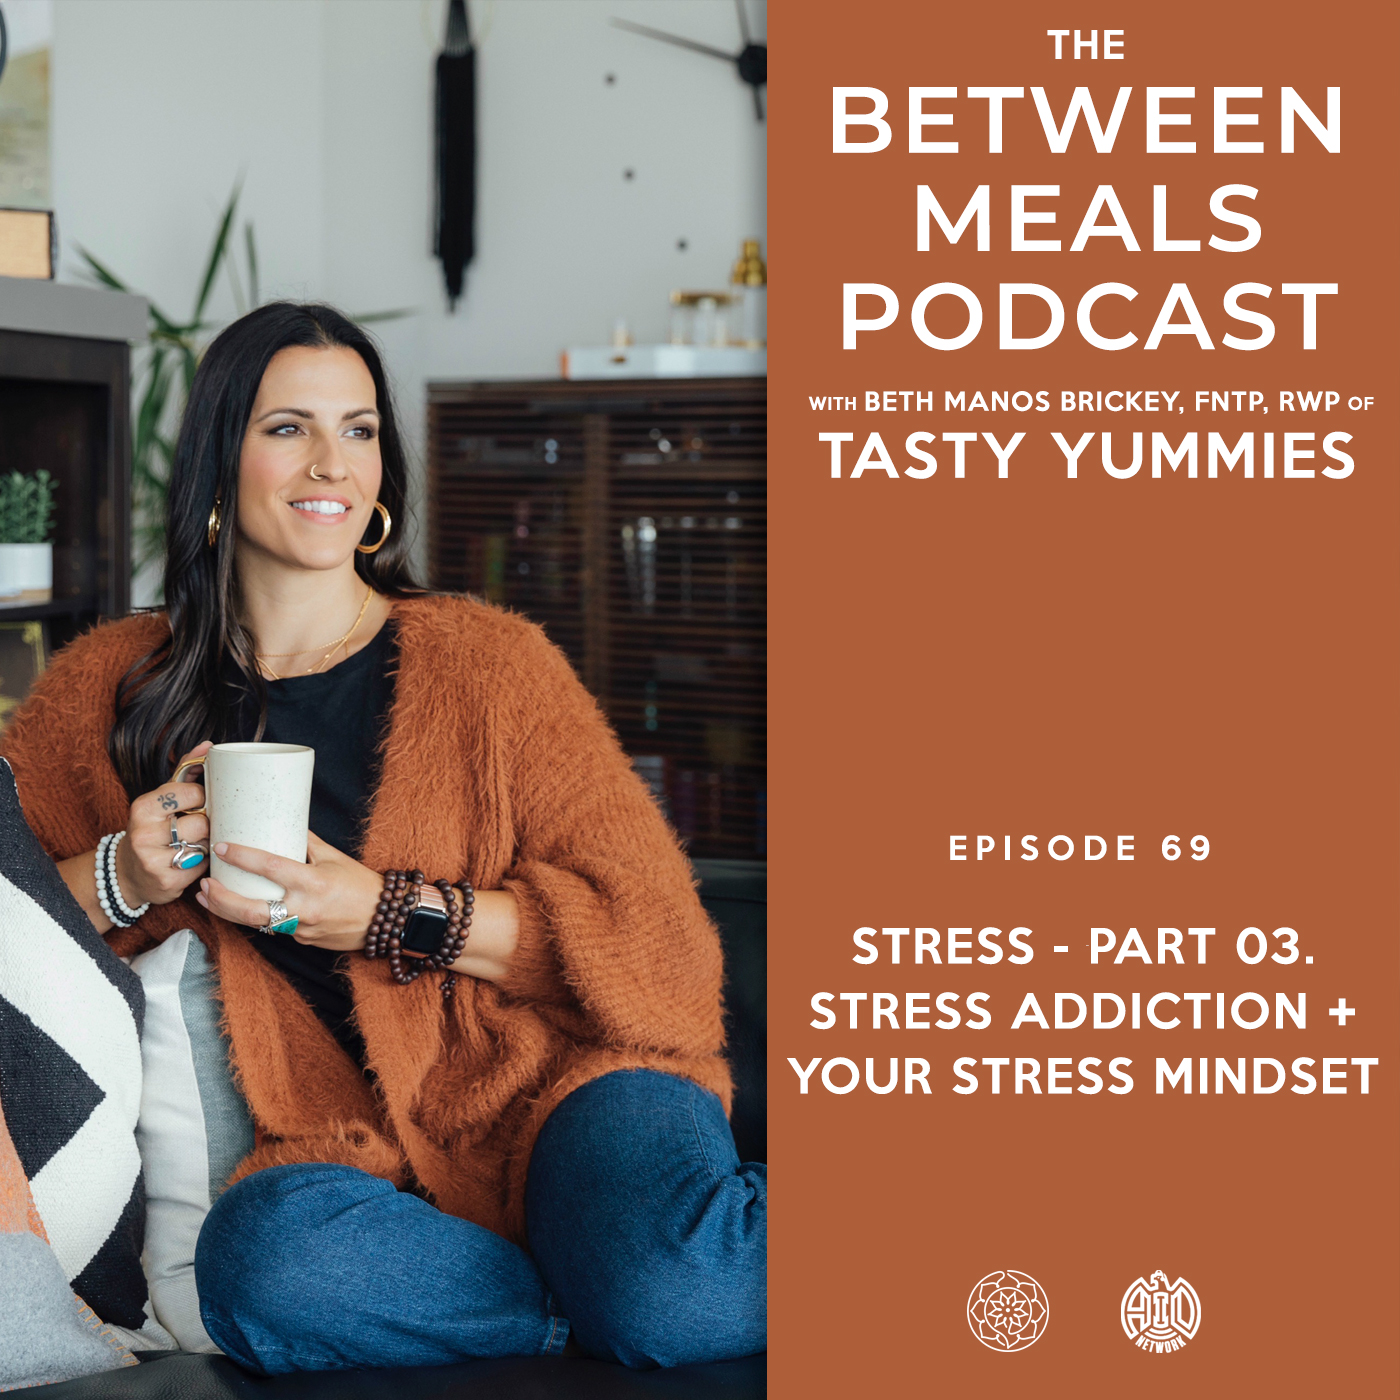 Between Meals Podcast. Episode 68: Stress Part 03: Stress Addiction and Your Stress Mindset